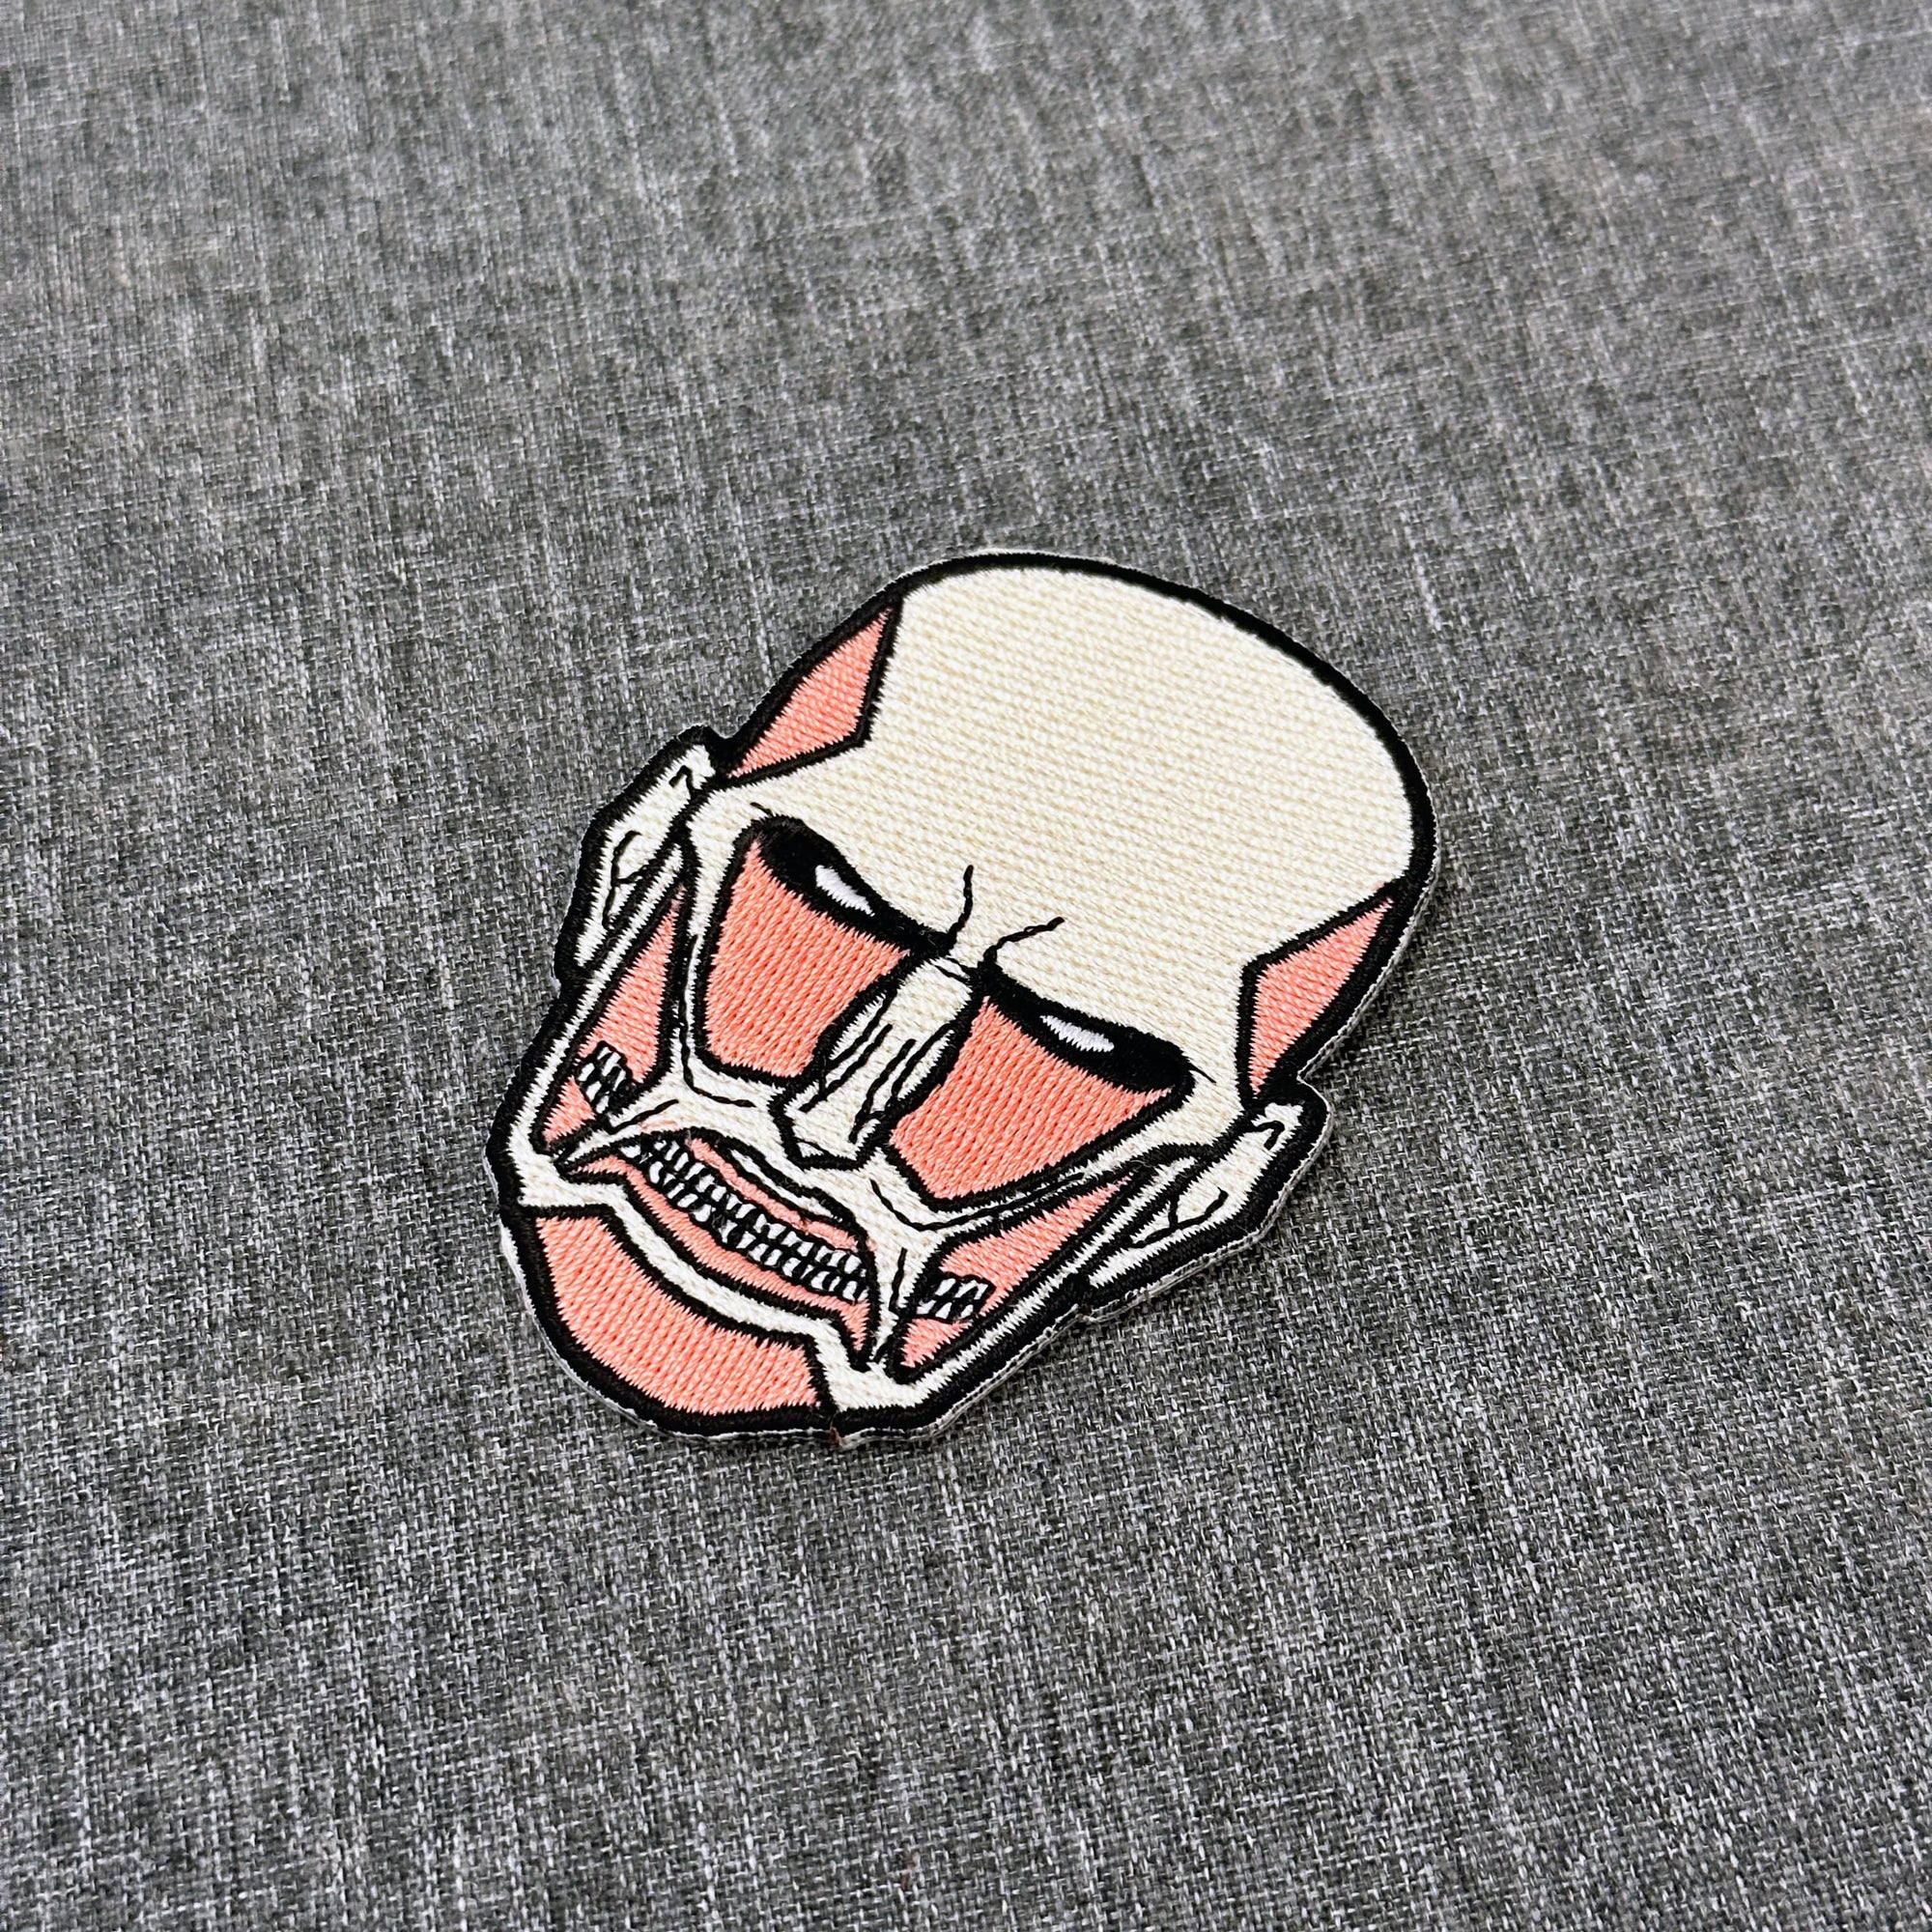 Colossal Titan Patch